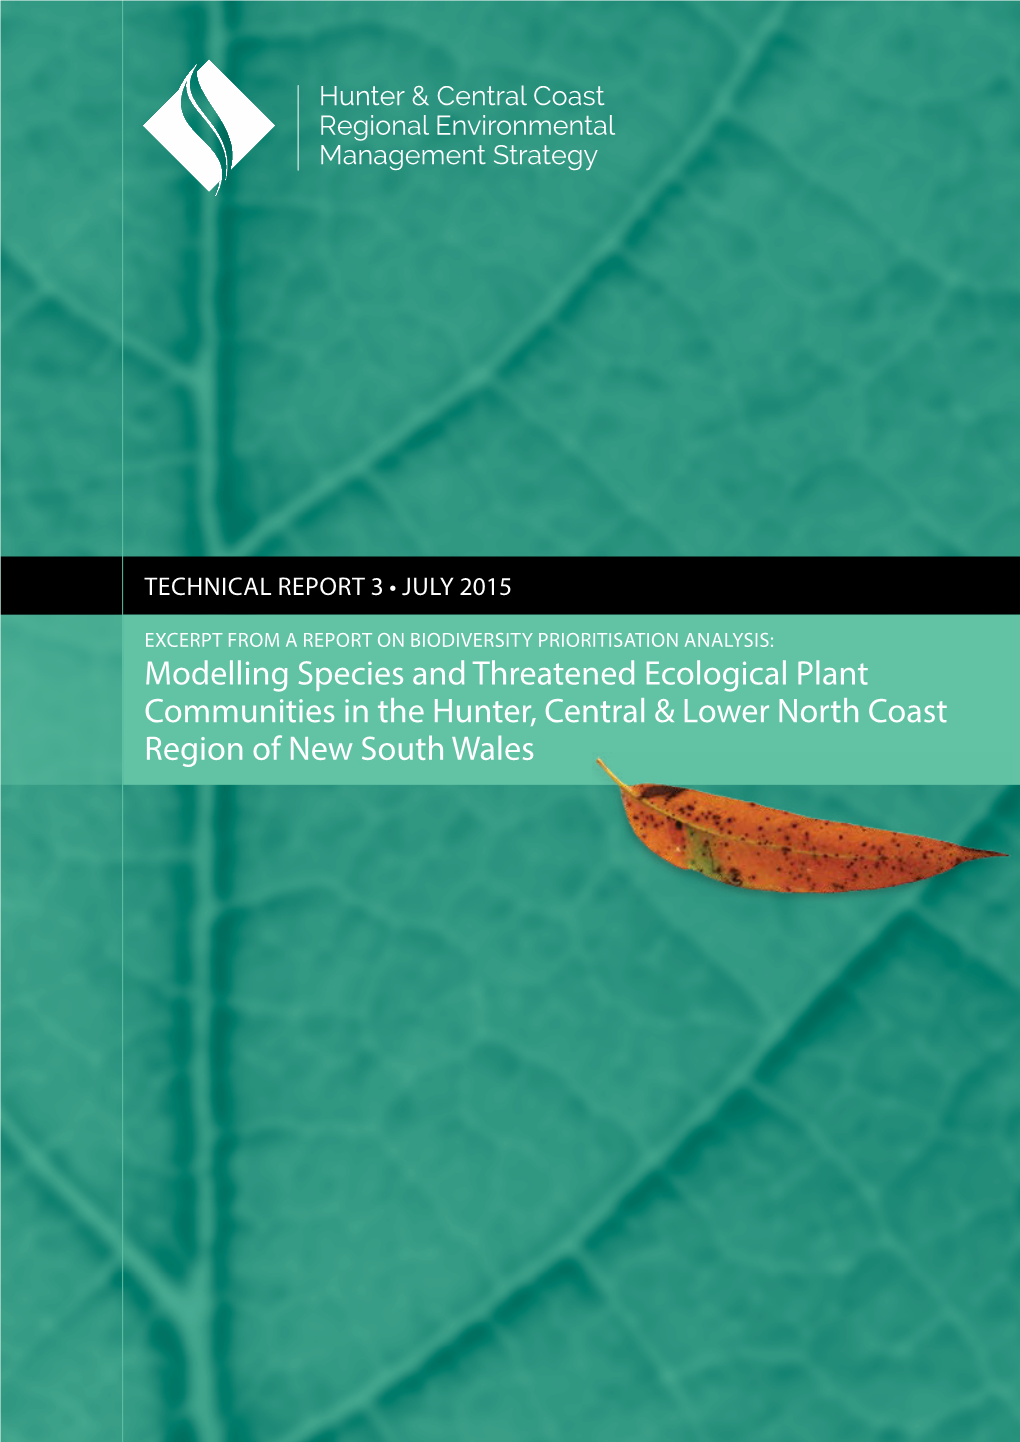 Modelling Species and Threatened Ecological Plant Communities in the Hunter, Central & Lower North Coast Region of New South Wales